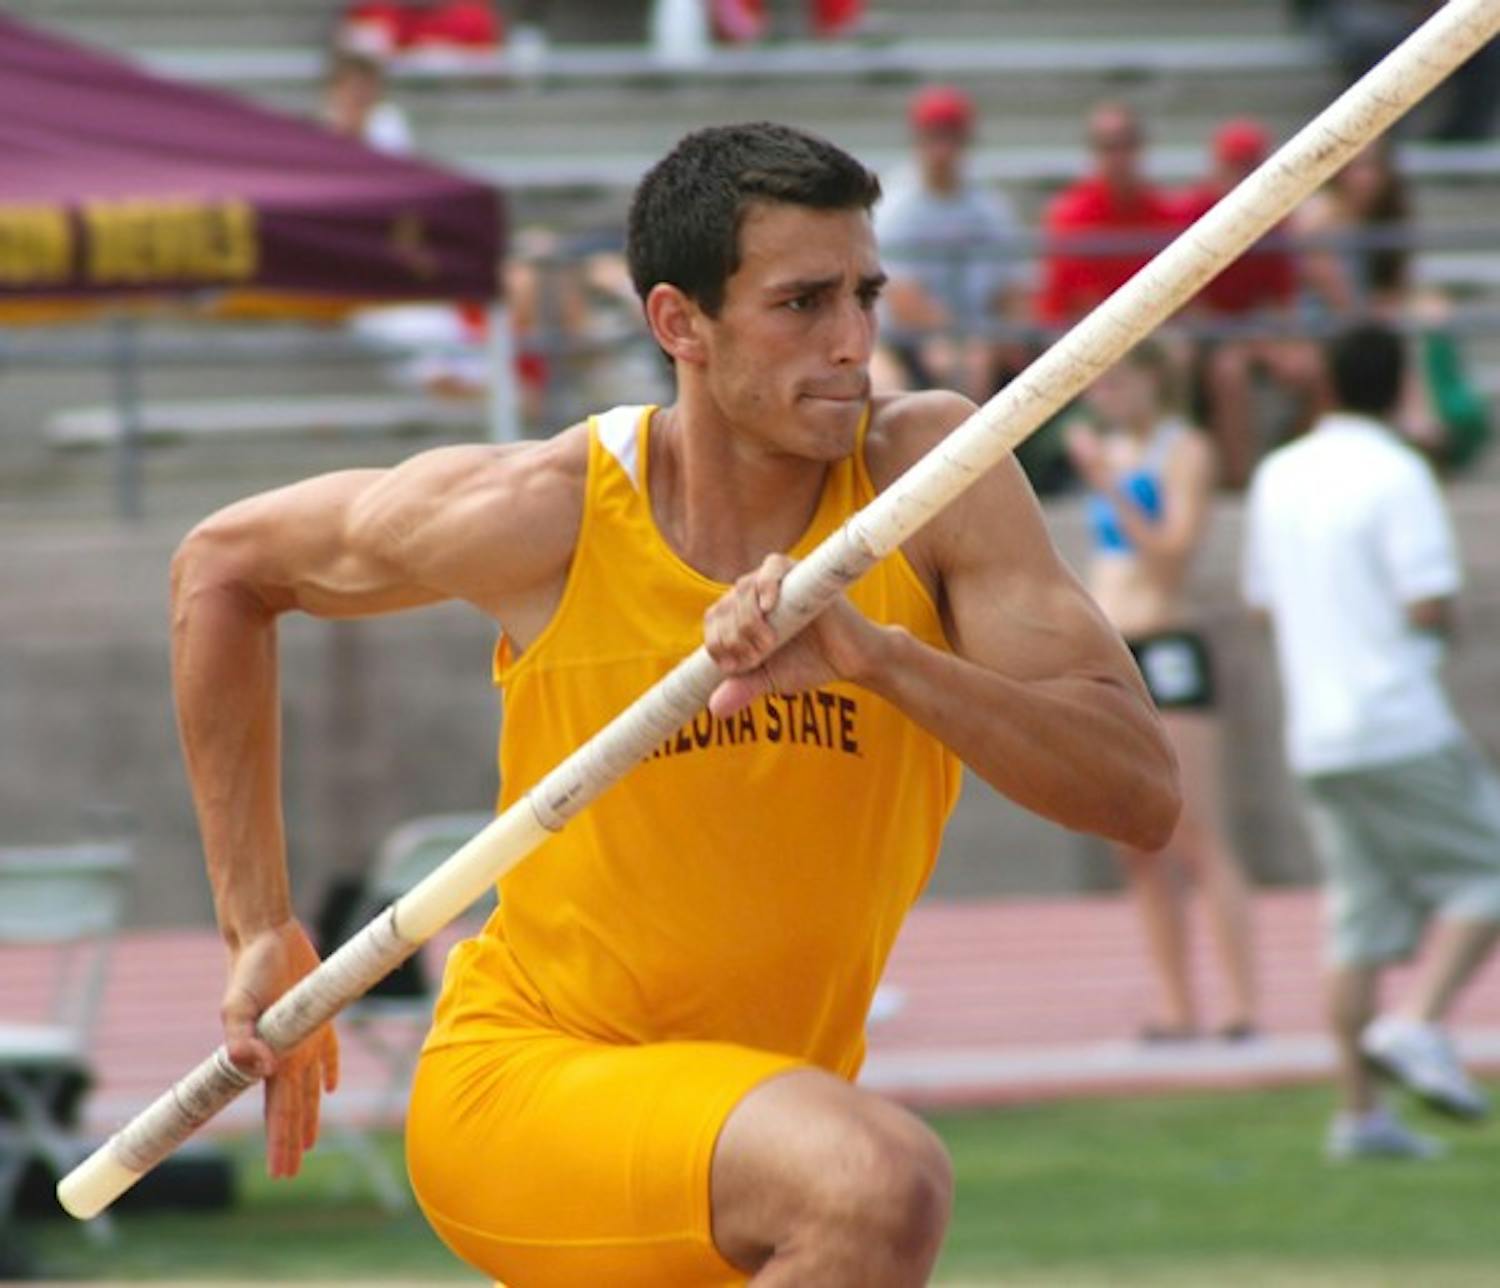 Home Sweet Home: ASU junior Jamie Sandys makes his run during the pole vault at the Sun Devil Open on Saturday. ASU dominated the home meet, recording 25 top-three marks during the two-day meet. (Photo by Lisa Bartoli)